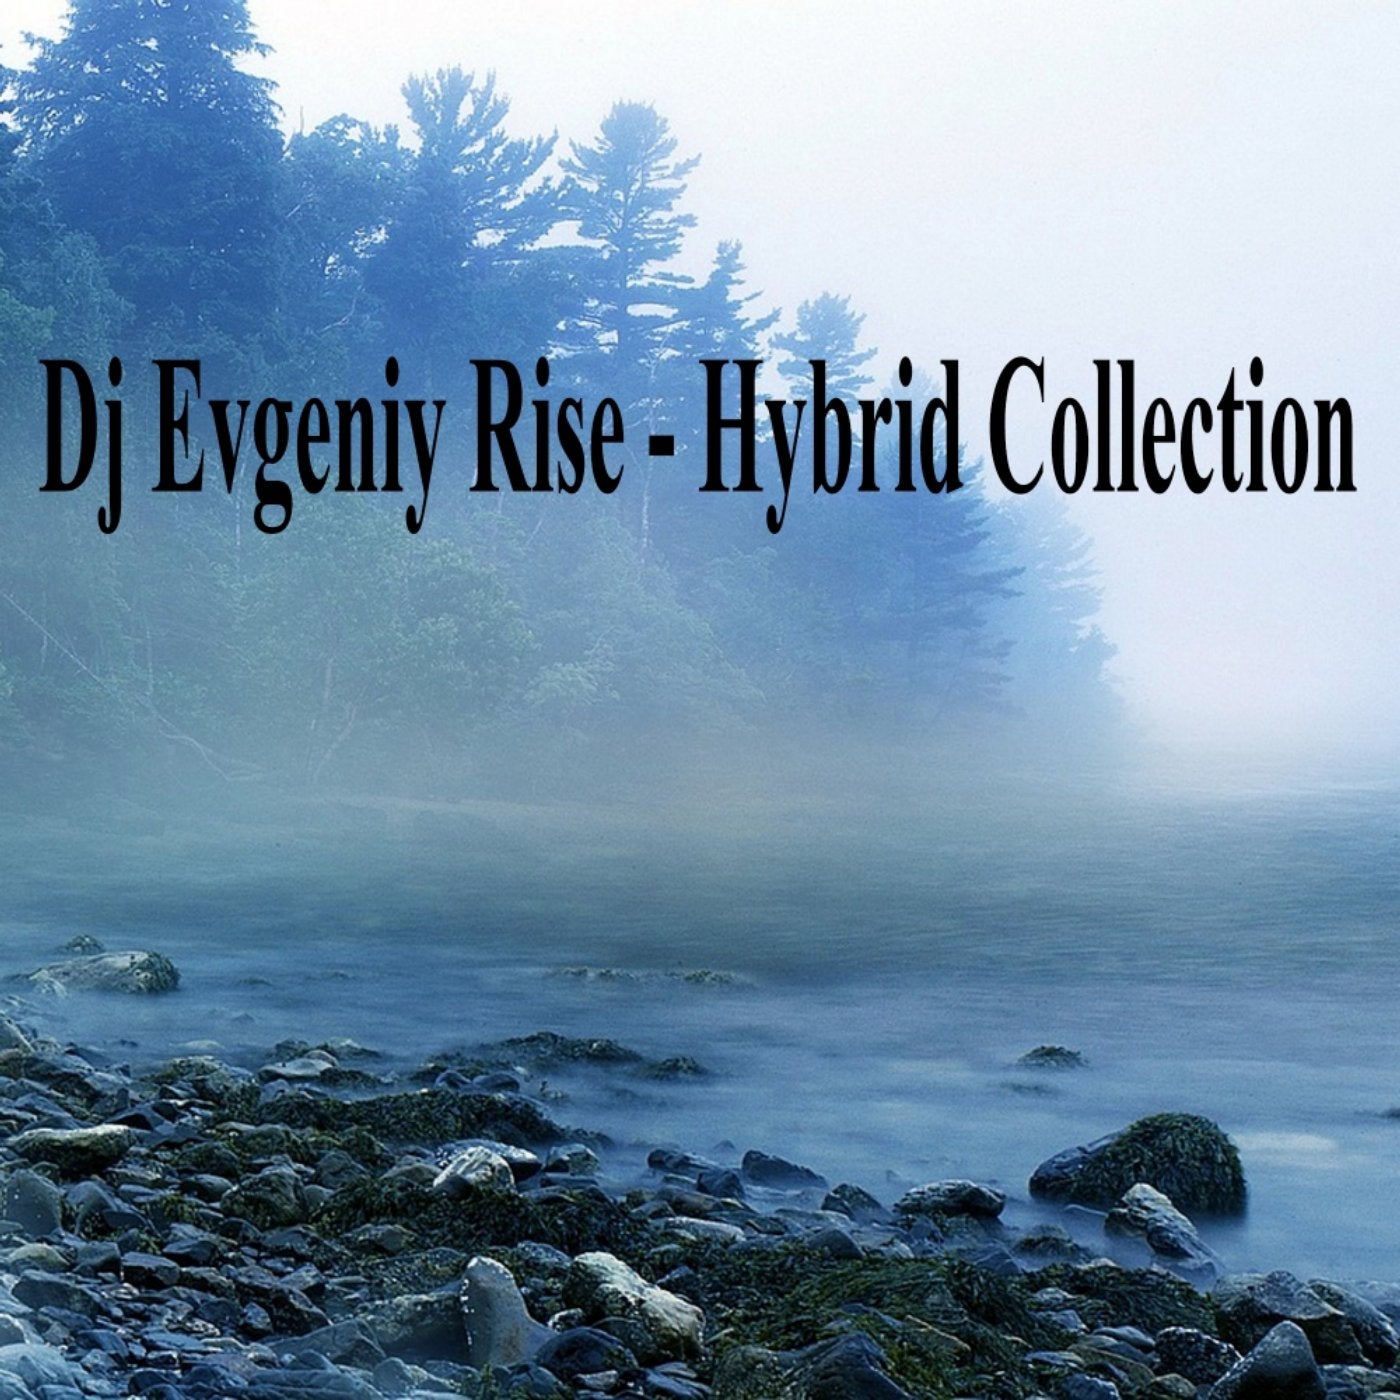 Hybrid Collection